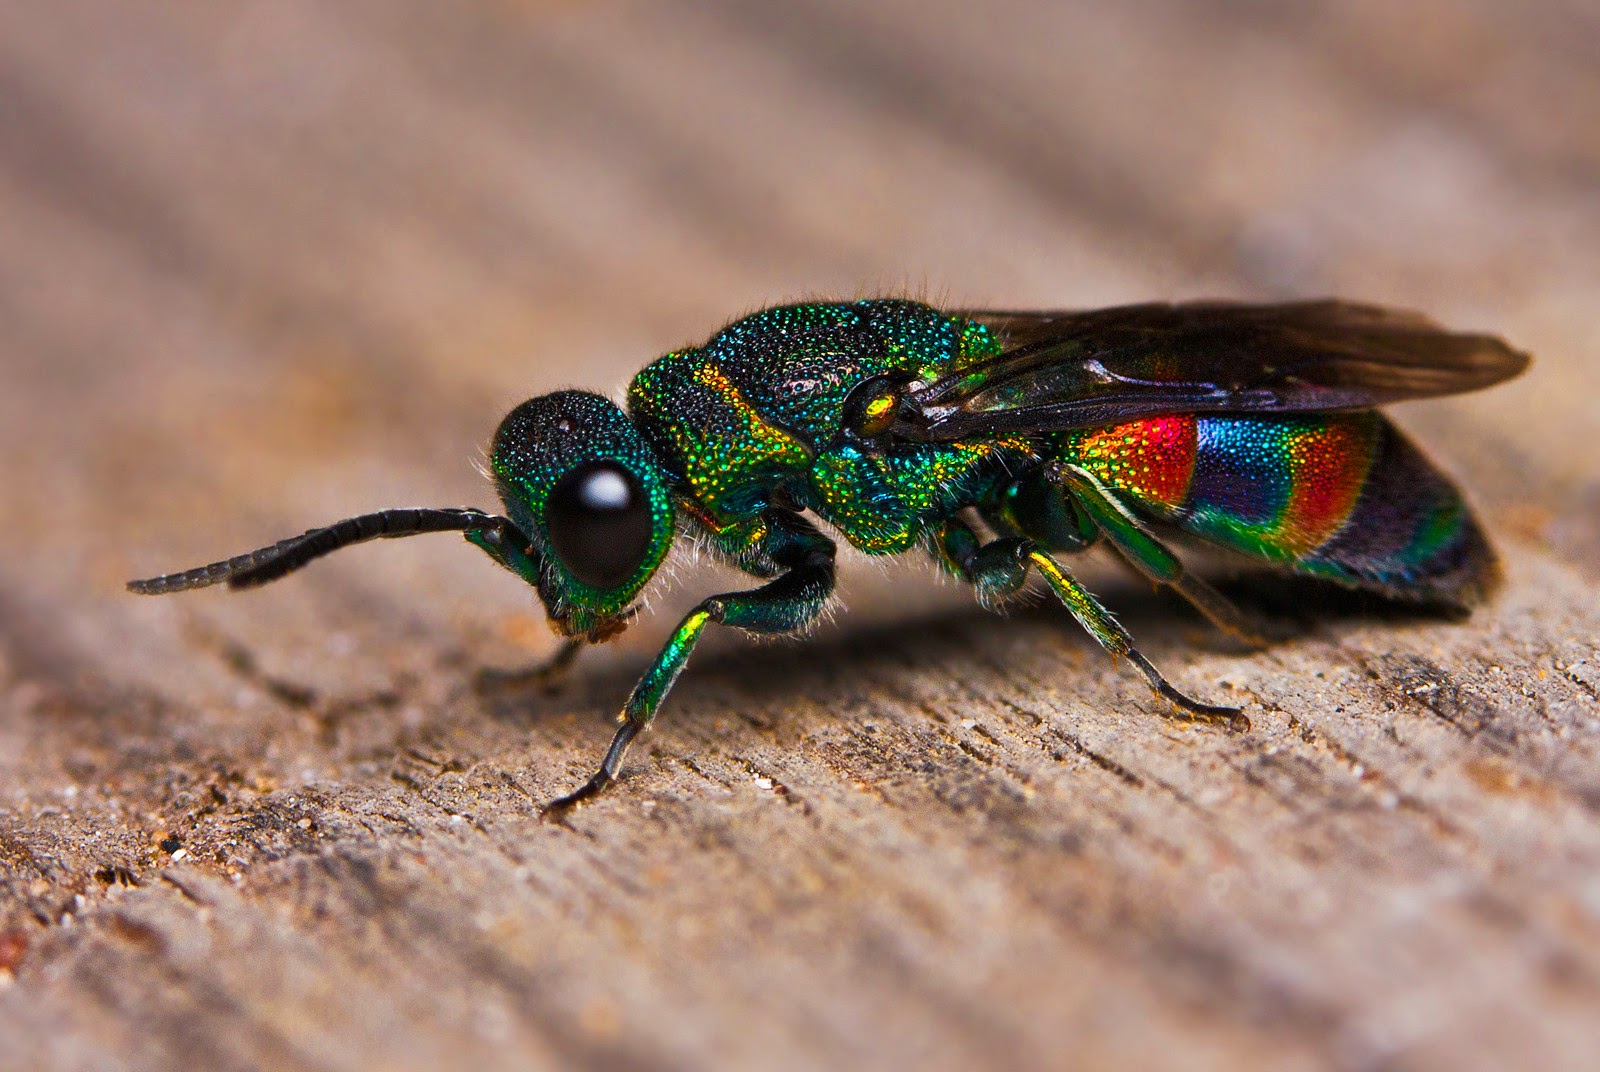 Not all wasps are yellow. Here's a multi-colored Cuckoo Wasp